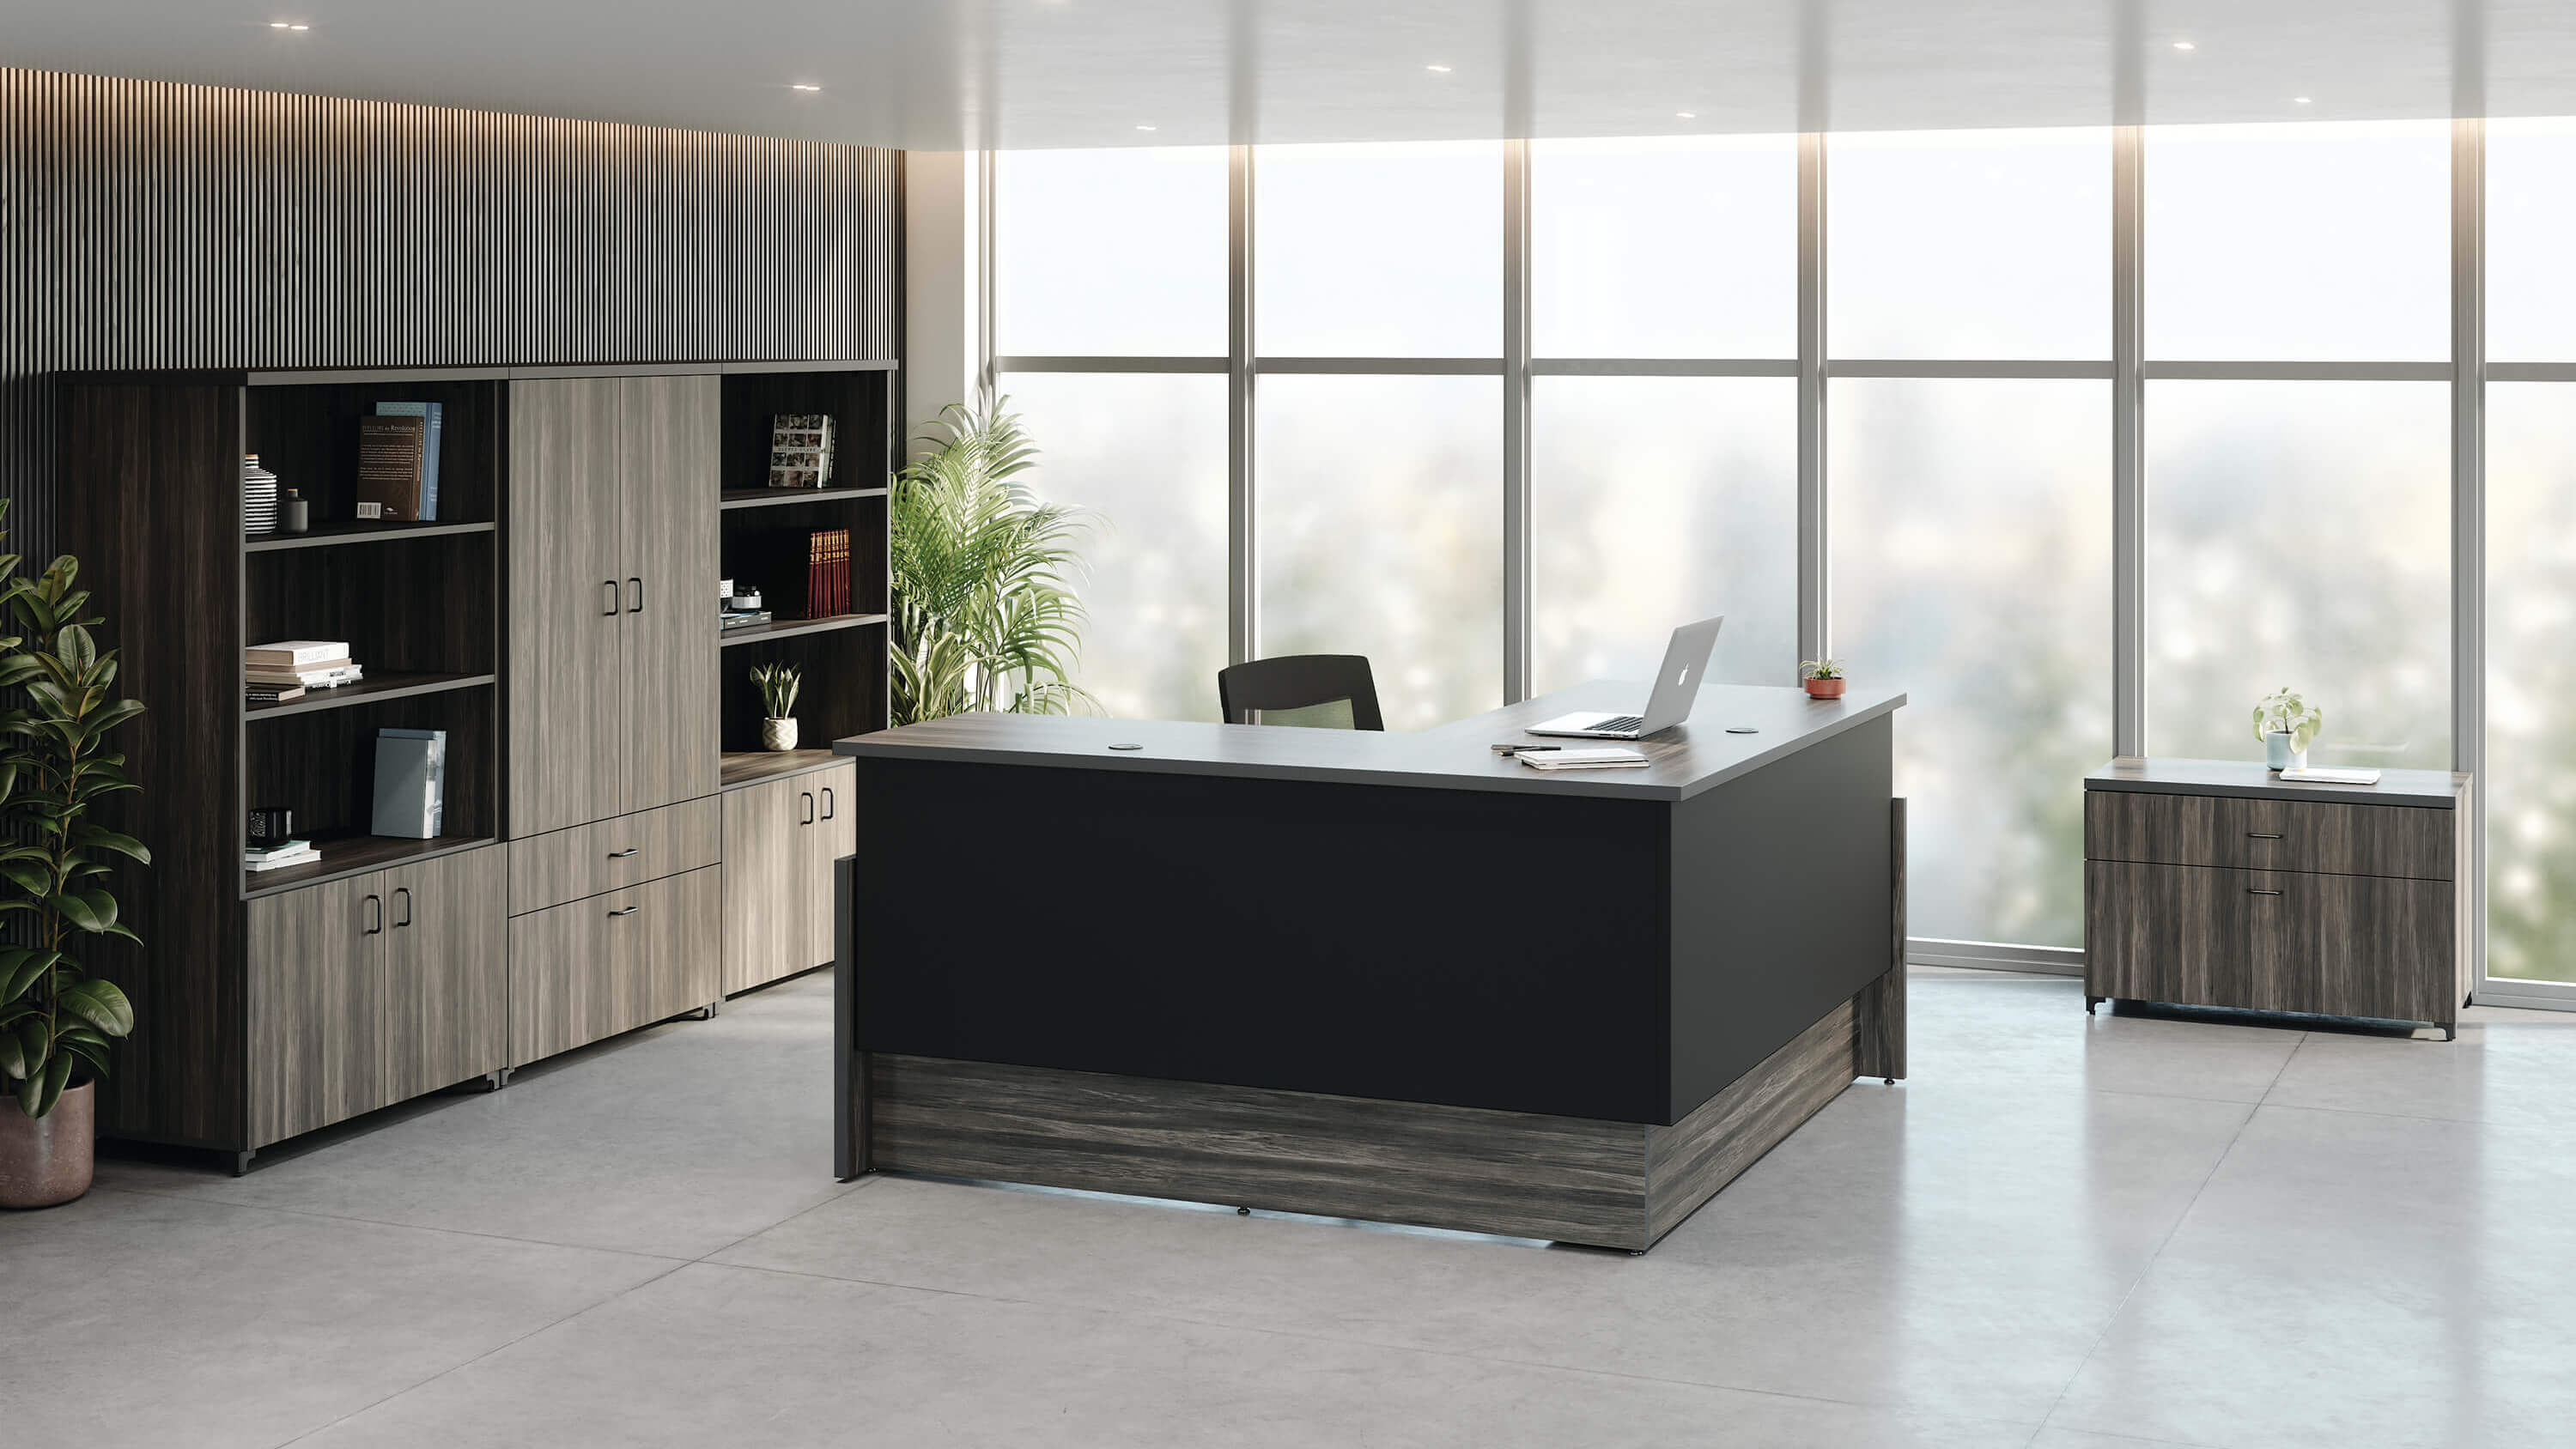 Presidente Executive fully enclosed L shape electric standing desk in standing position in modern private office with Tevita laminate vertical and credenza storage system